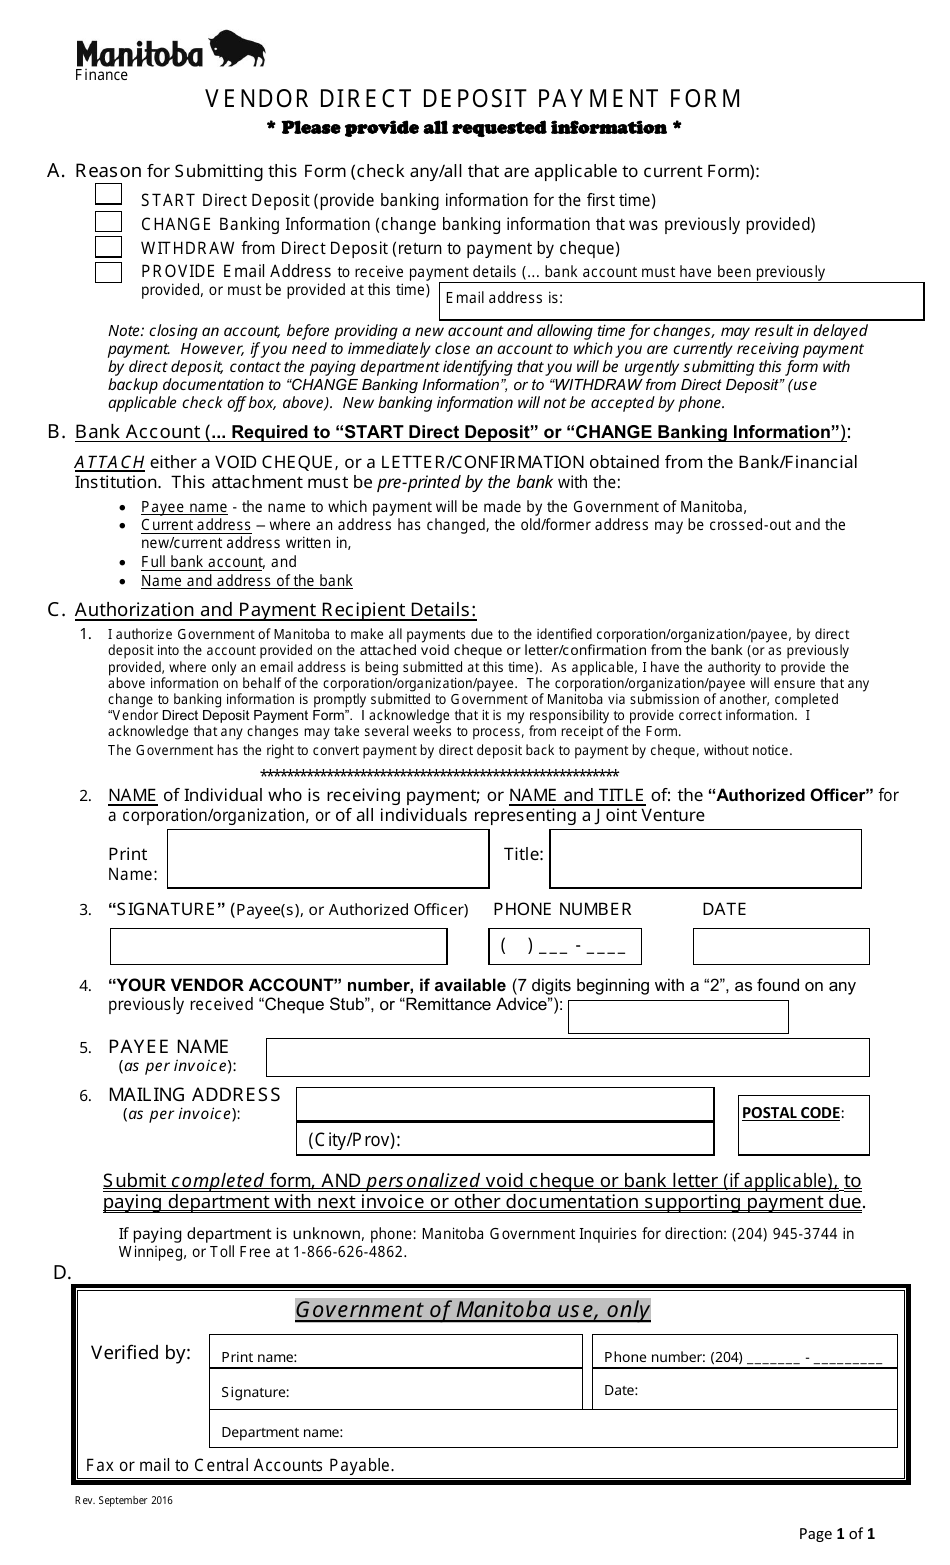 Vendor Direct Deposit Payment Form - Manitoba, Canada, Page 1